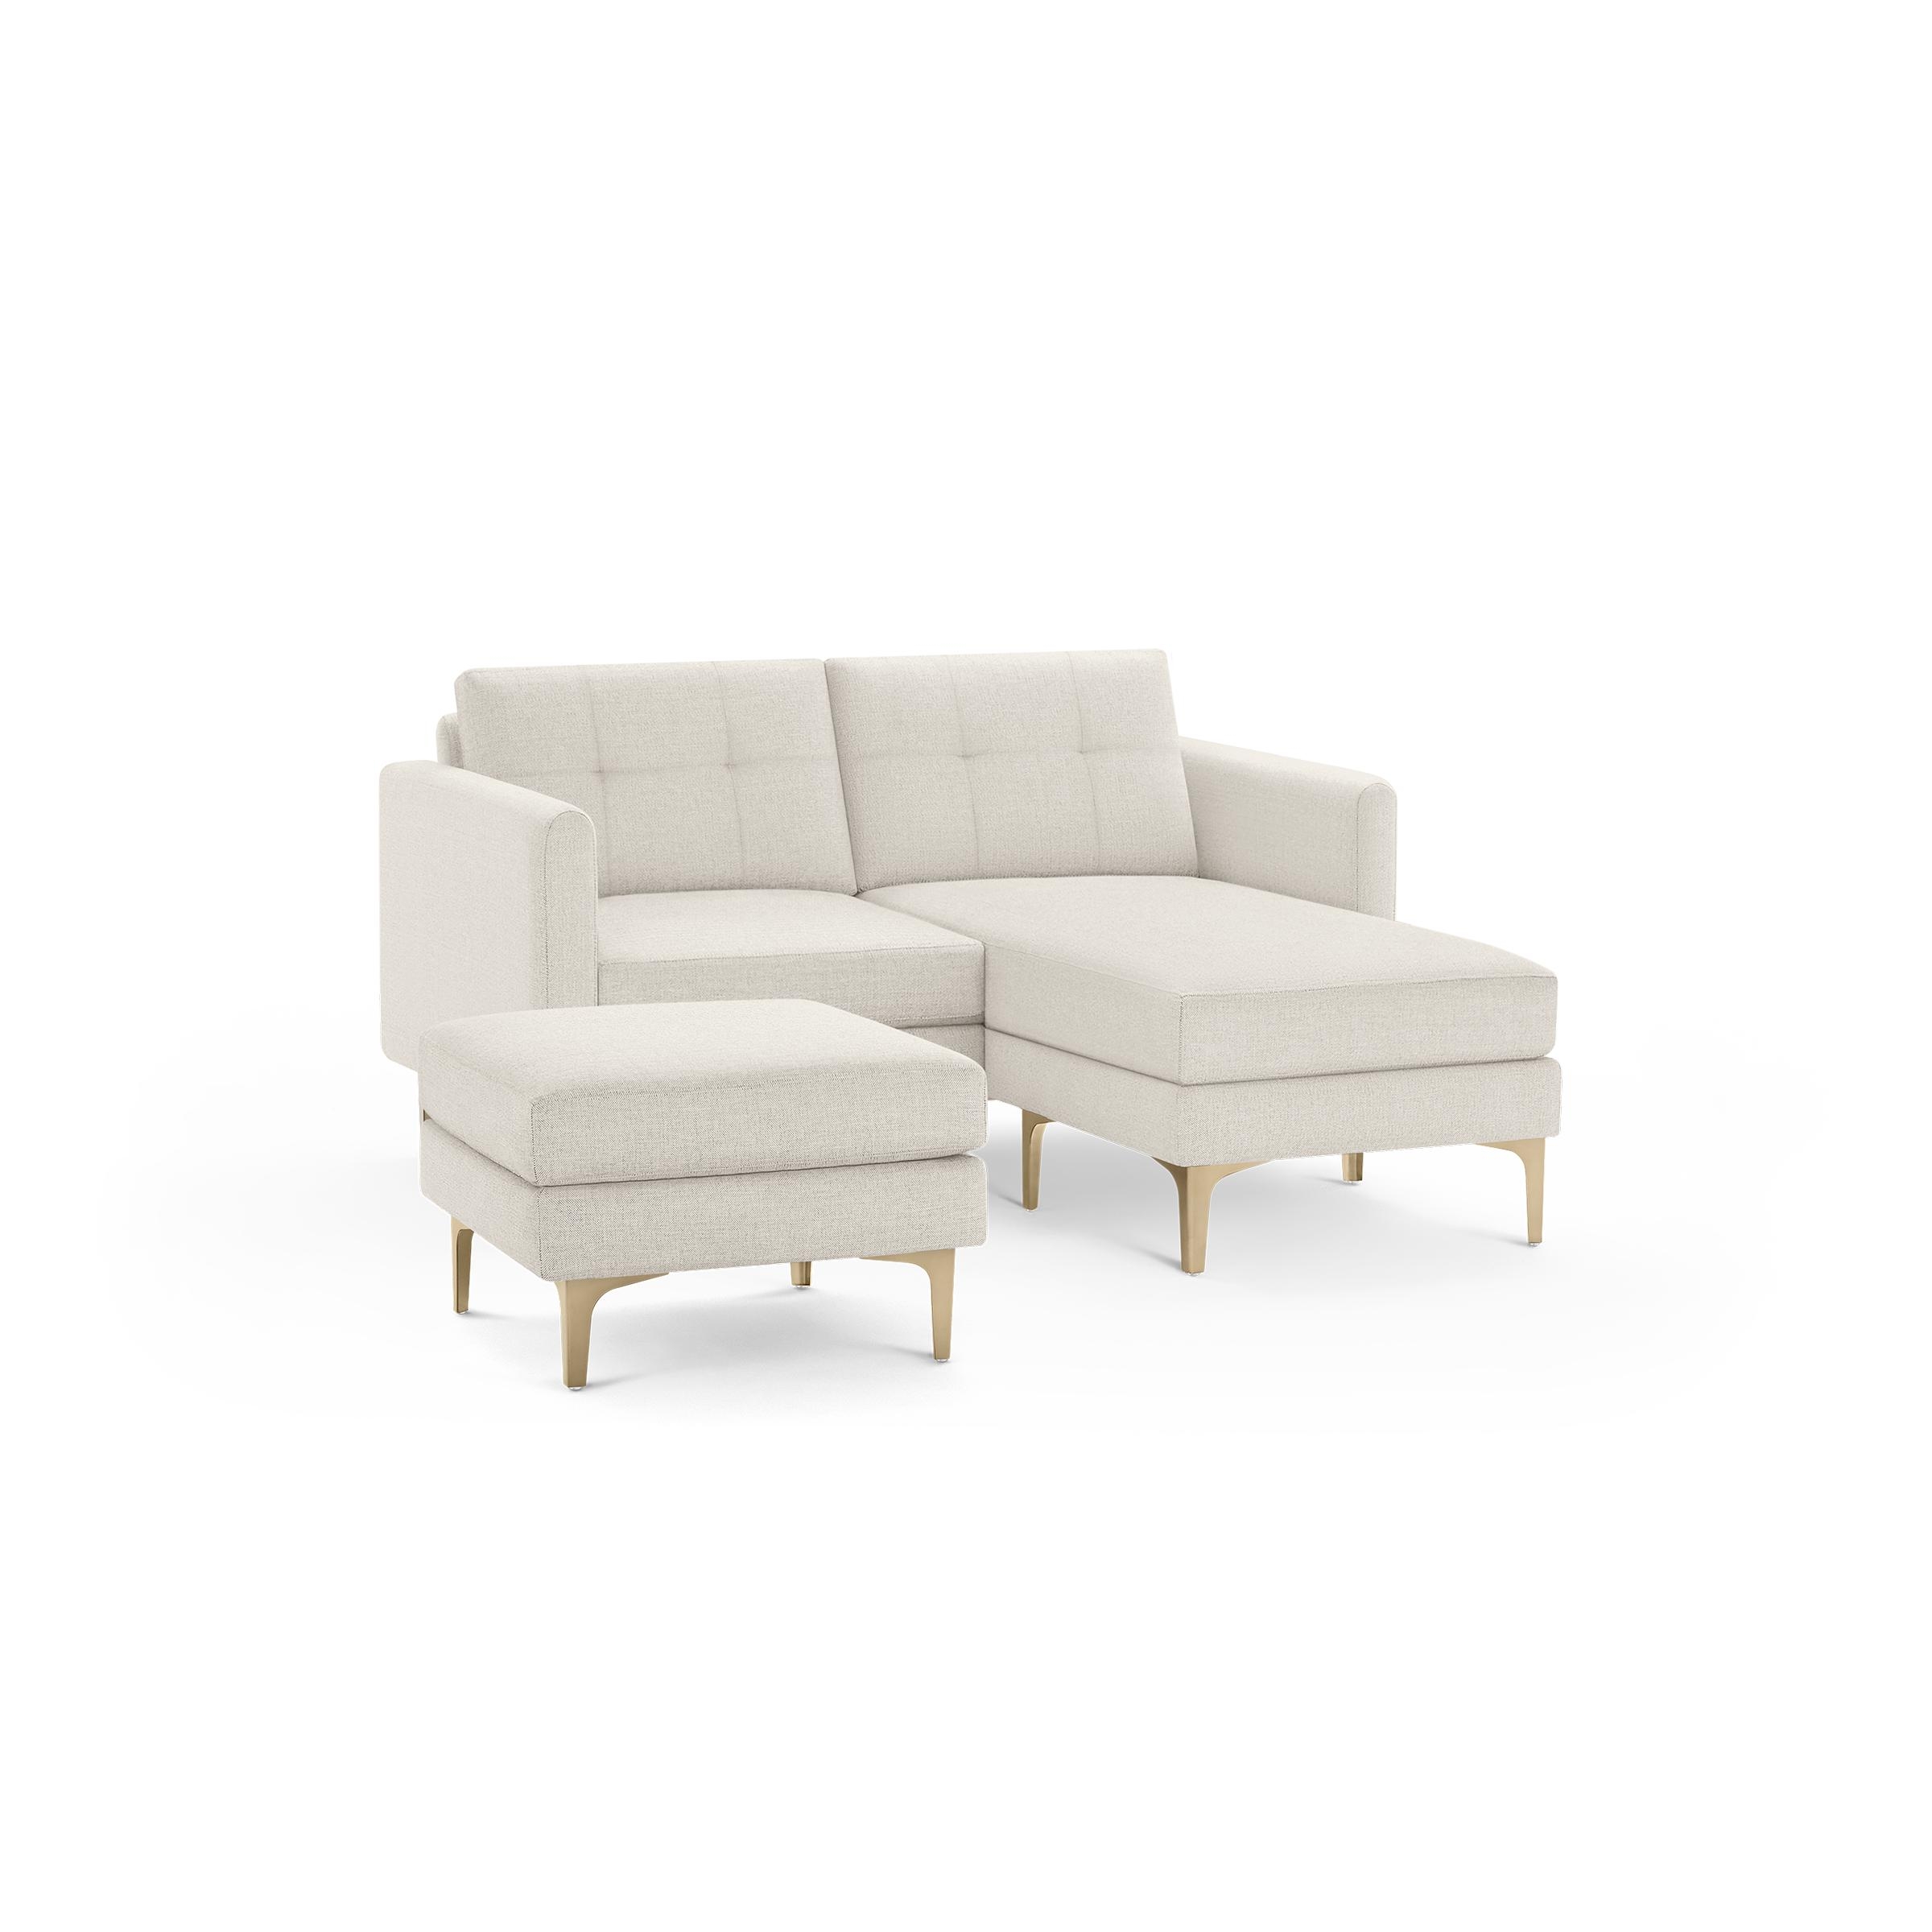 Nomad Loveseat with Chaise, Ottoman in Ivory - Image 0